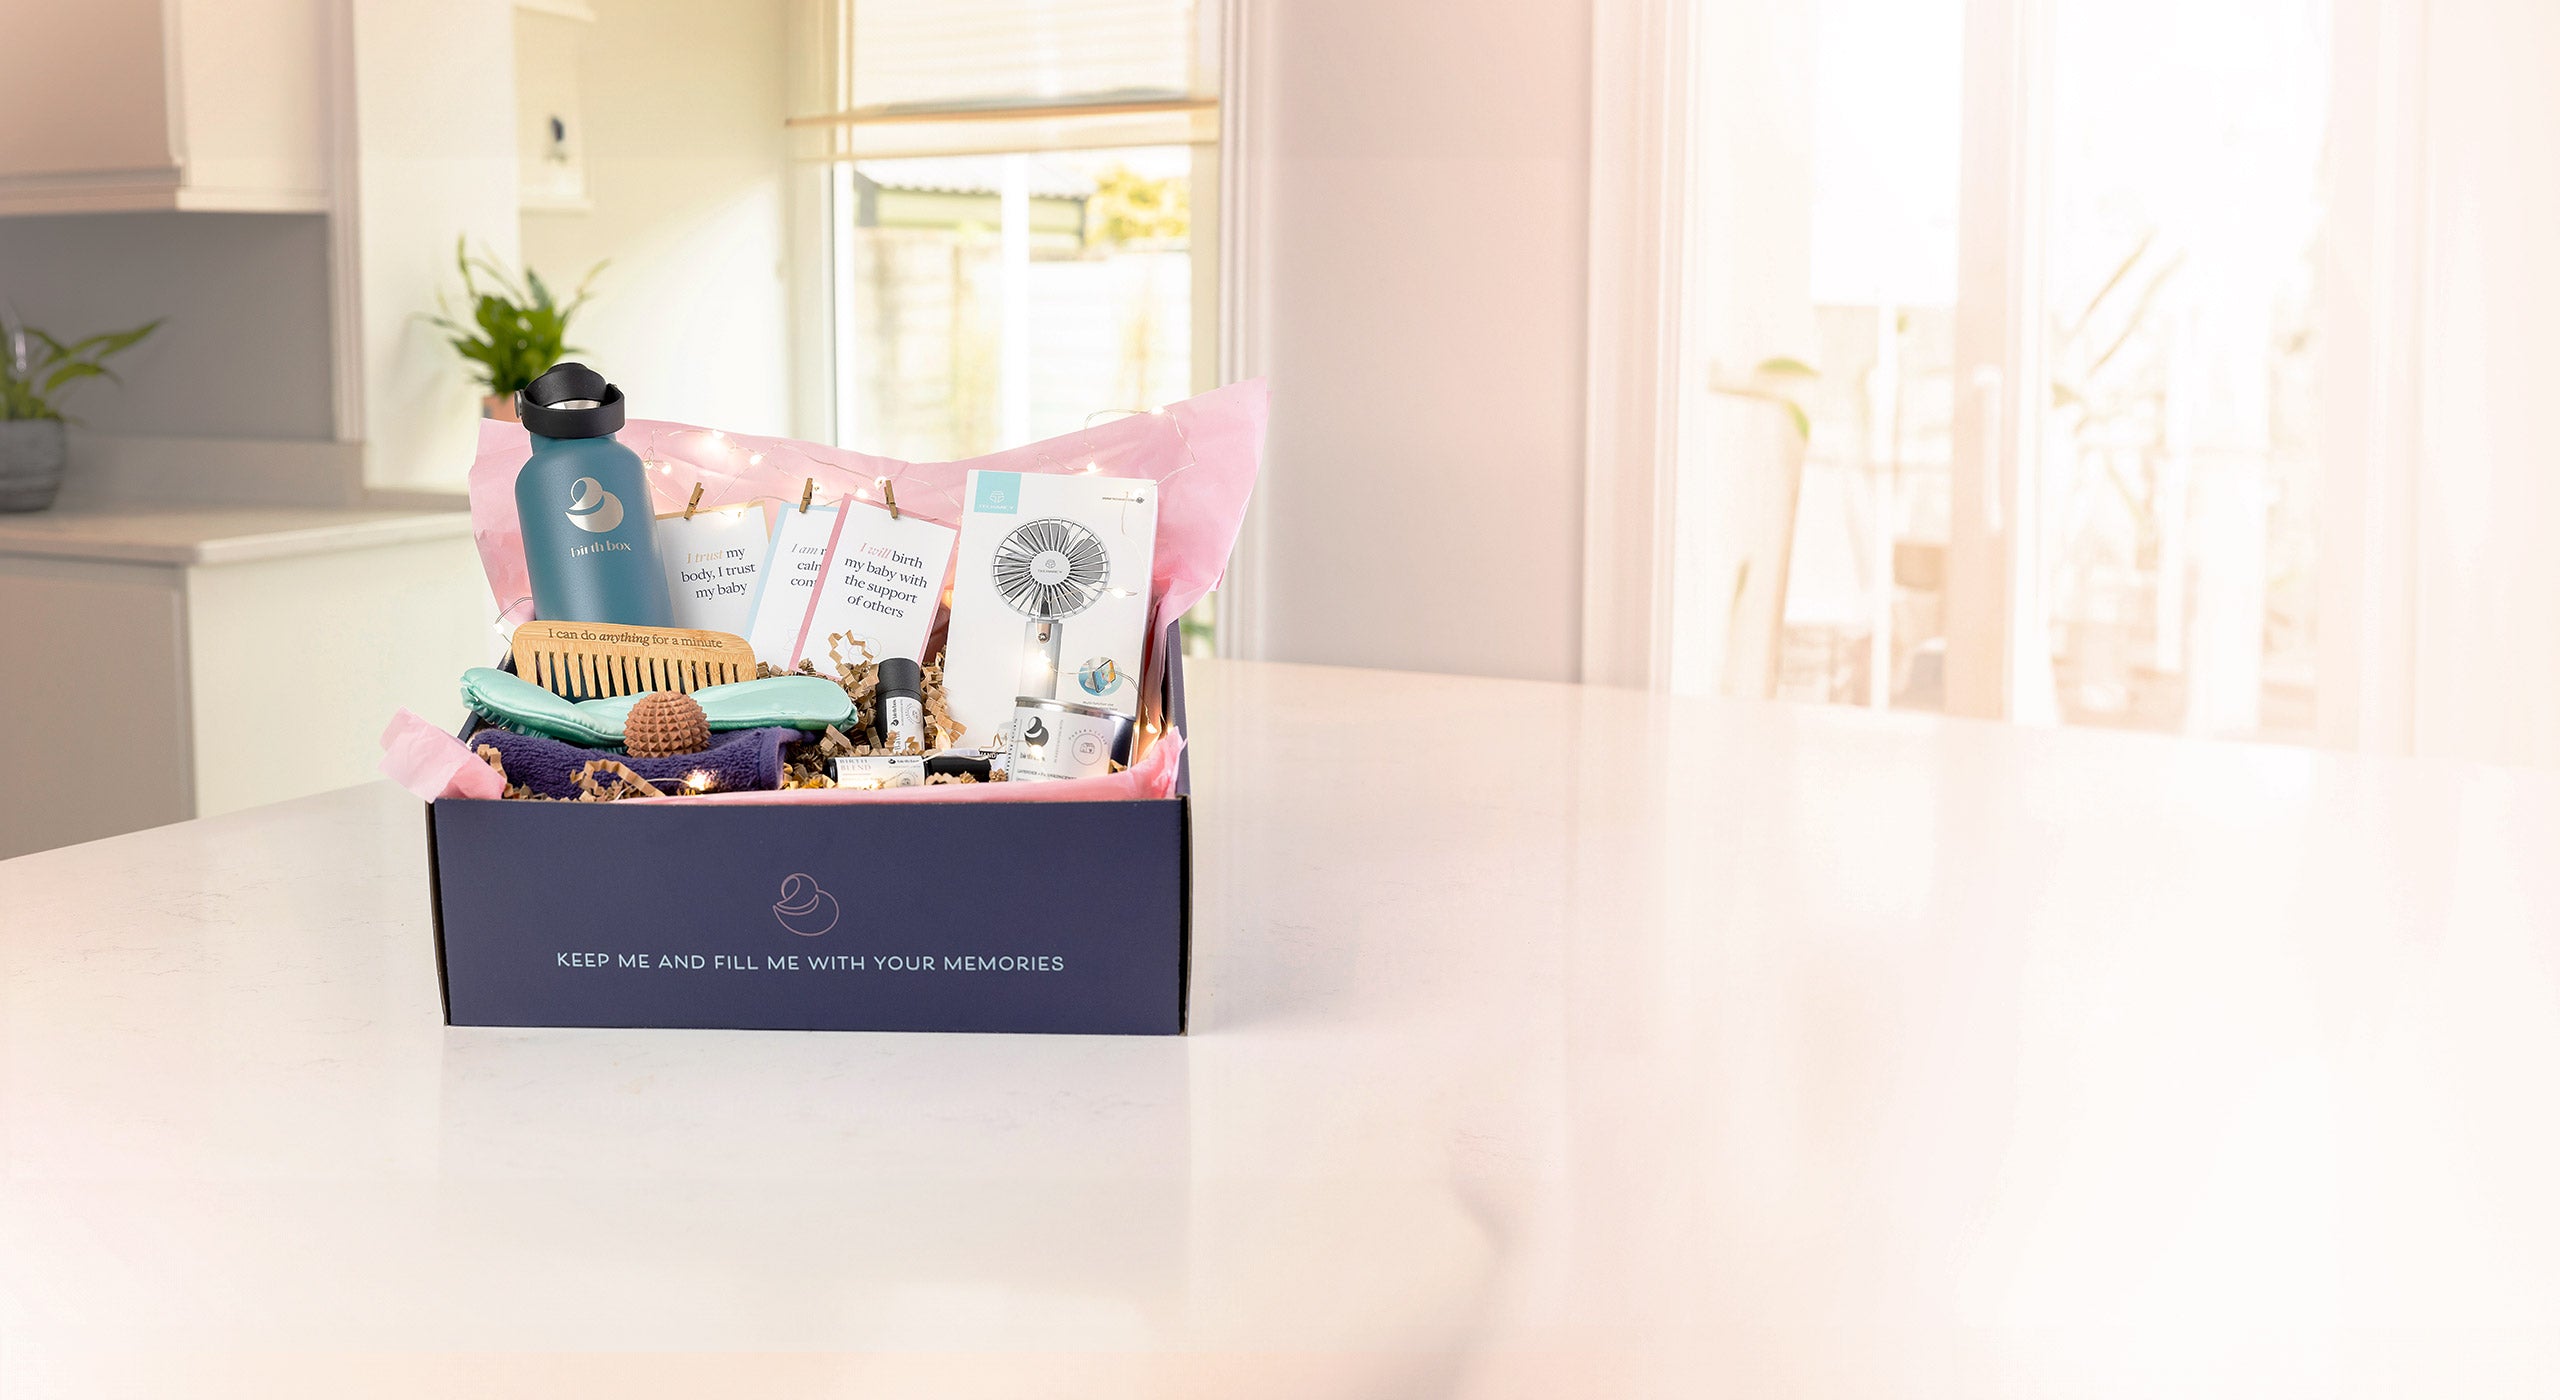 The Birth Box open on a kitchen counter displaying all of the products inside